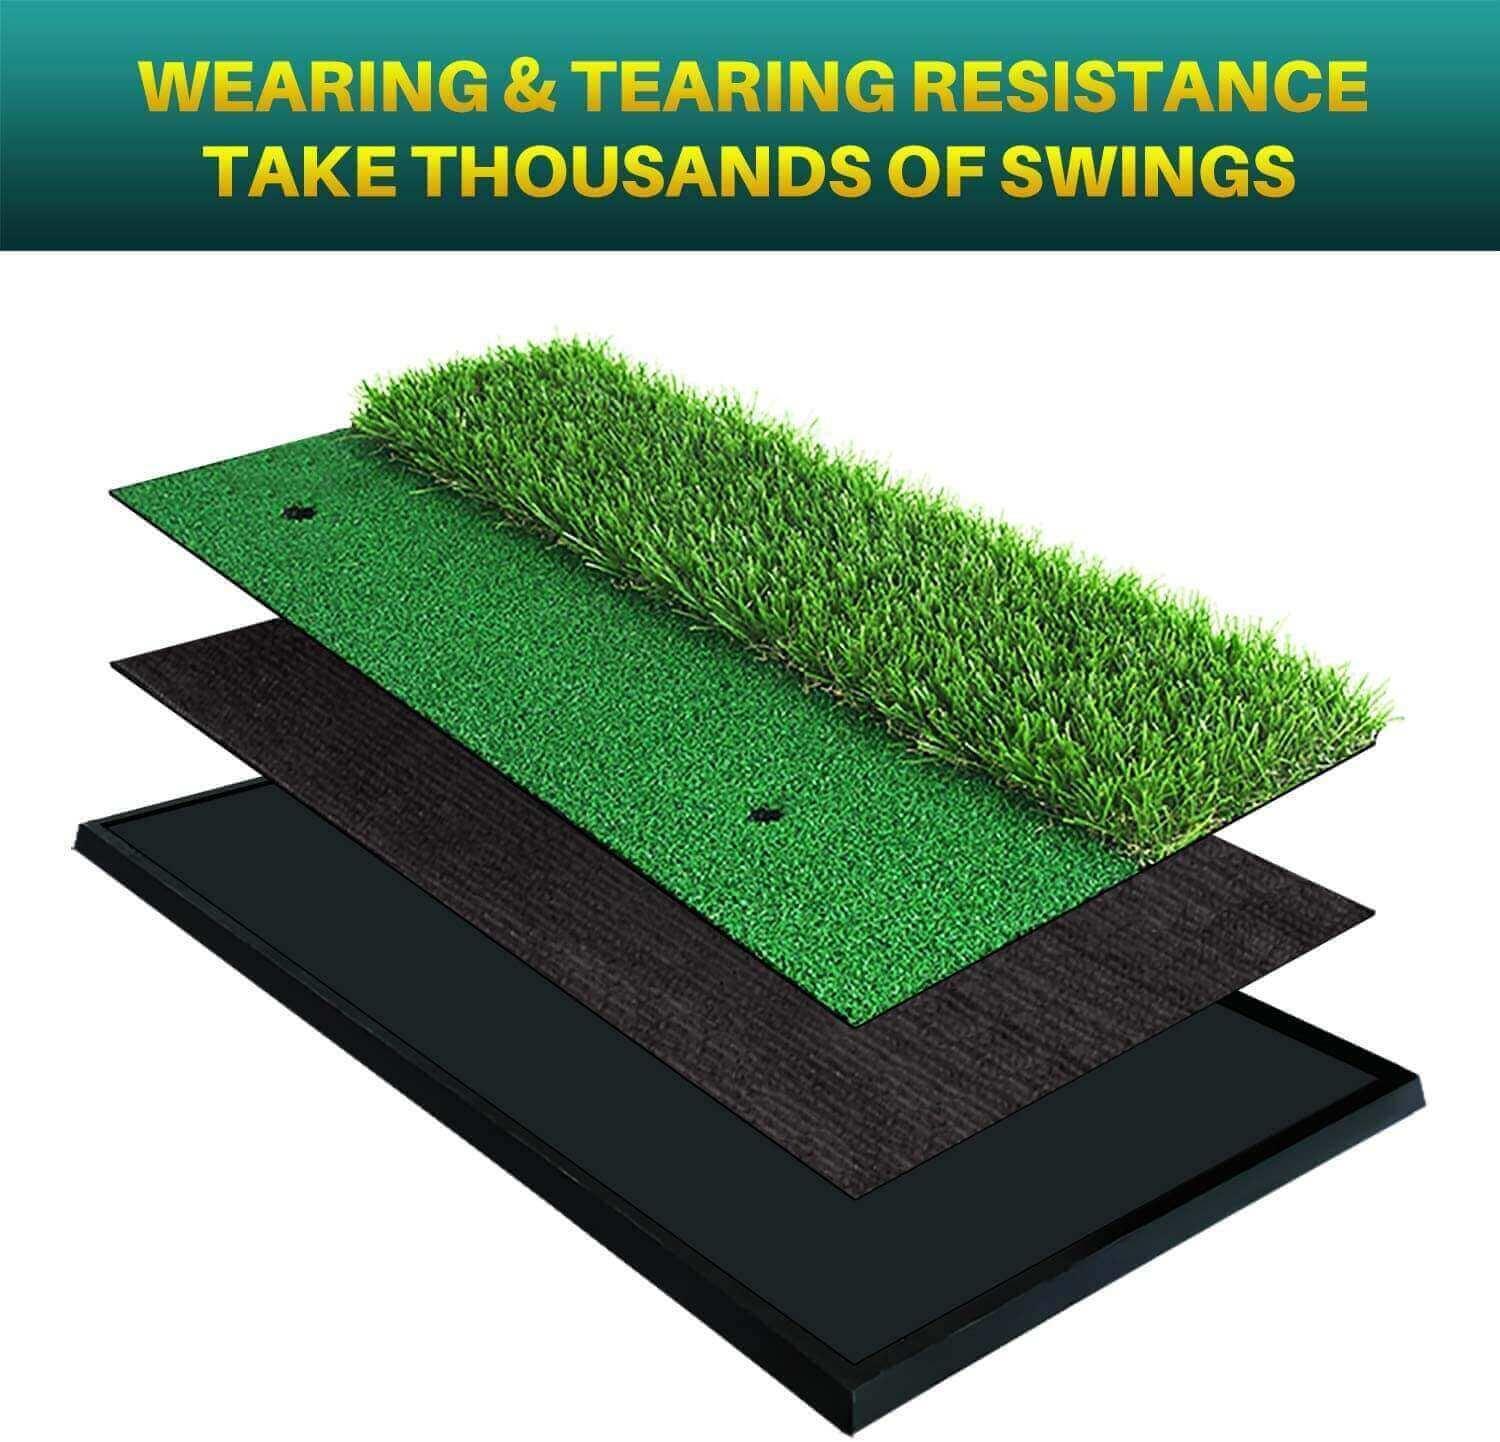 Golfedge Golf Turf Practice Mat for Driving Hitting Chipping In India | golfedge  | India’s Favourite Online Golf Store | golfedgeindia.com